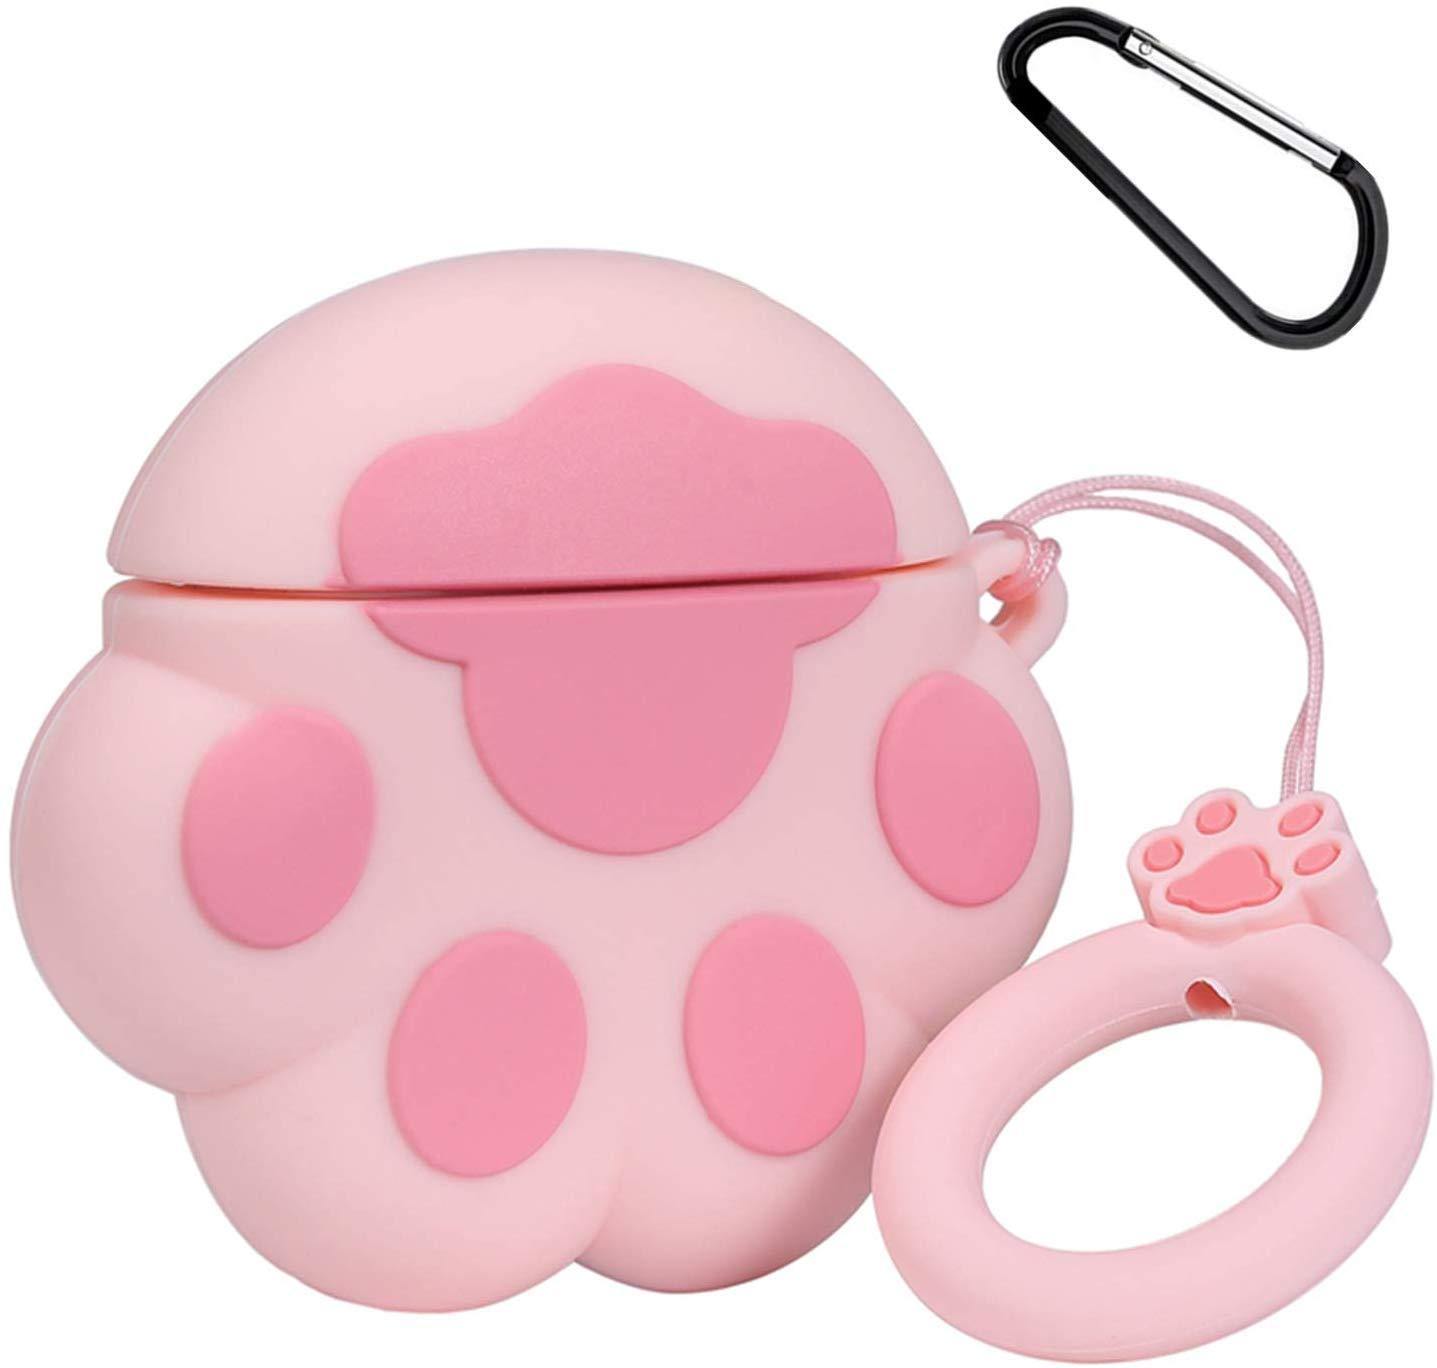 Paw Apple Airpods Case - Lottemi